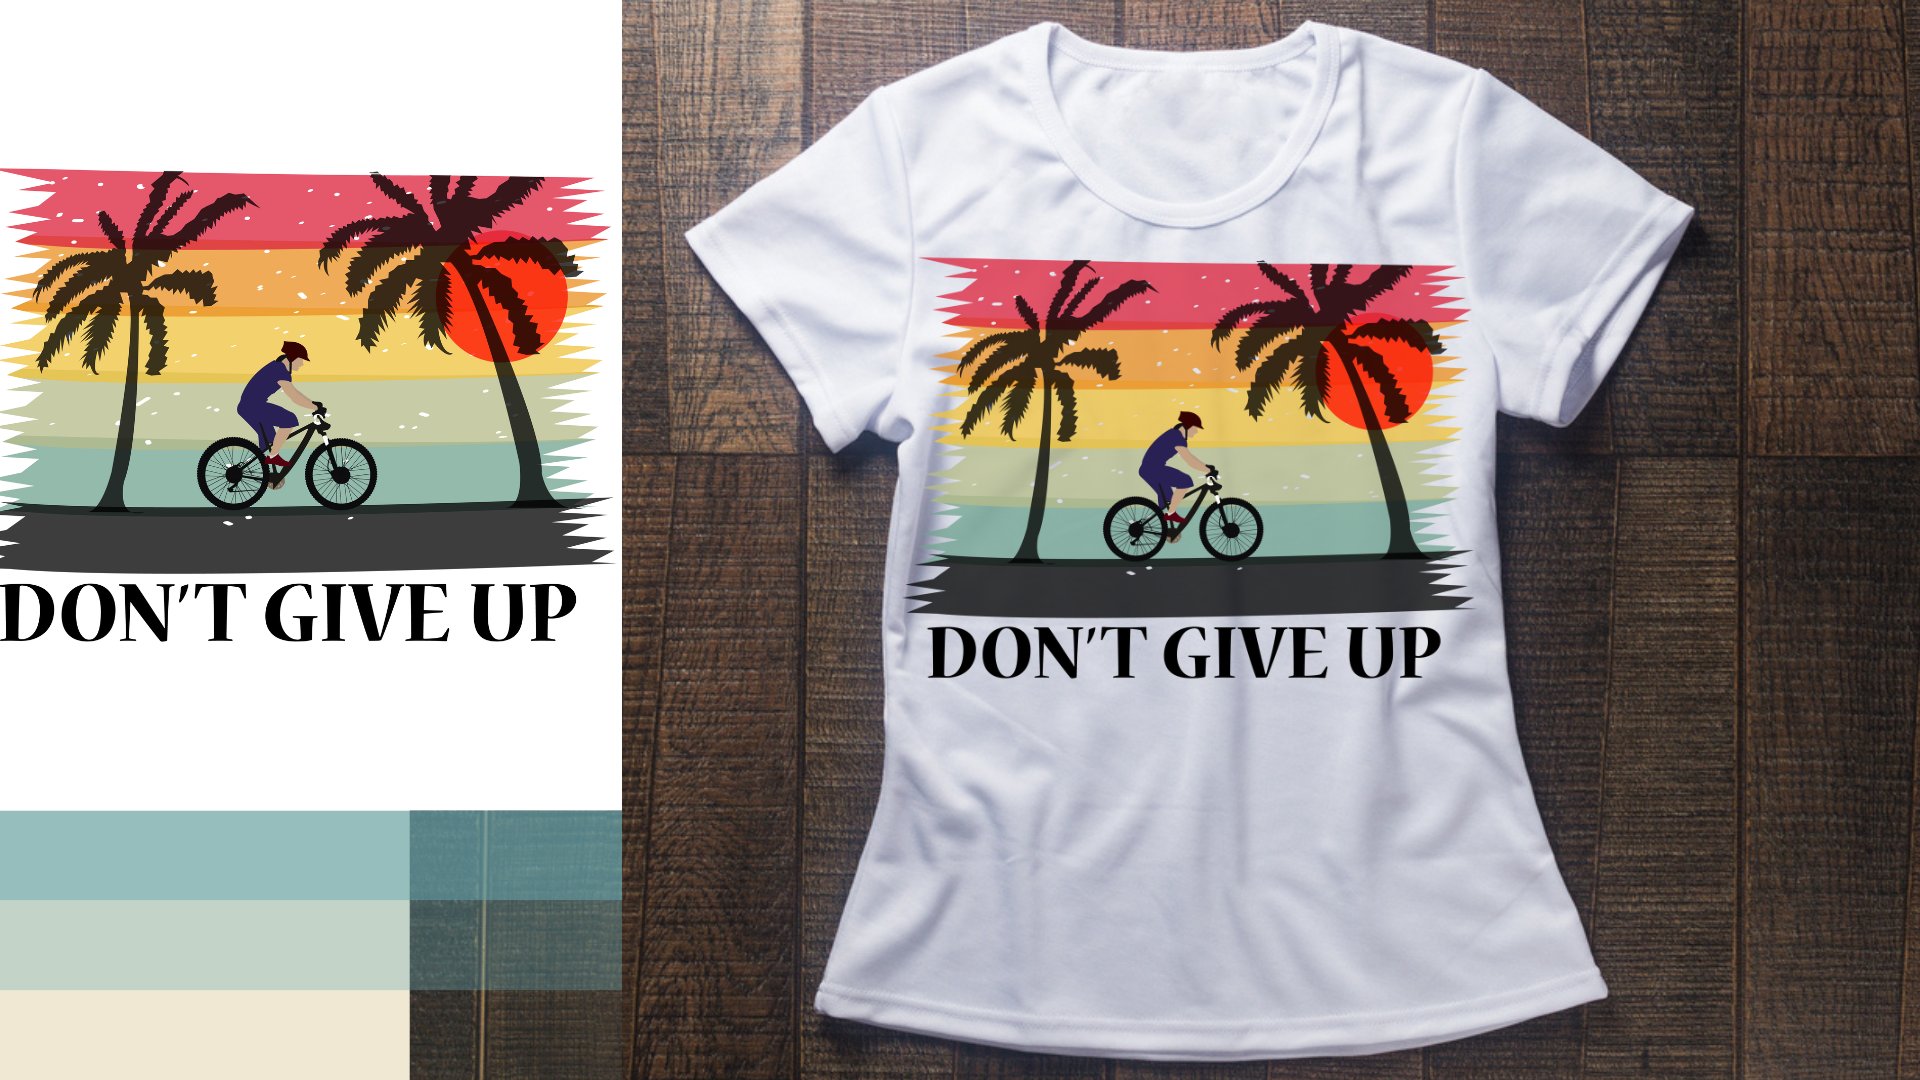 Women's t - shirt that says don't give up and a.